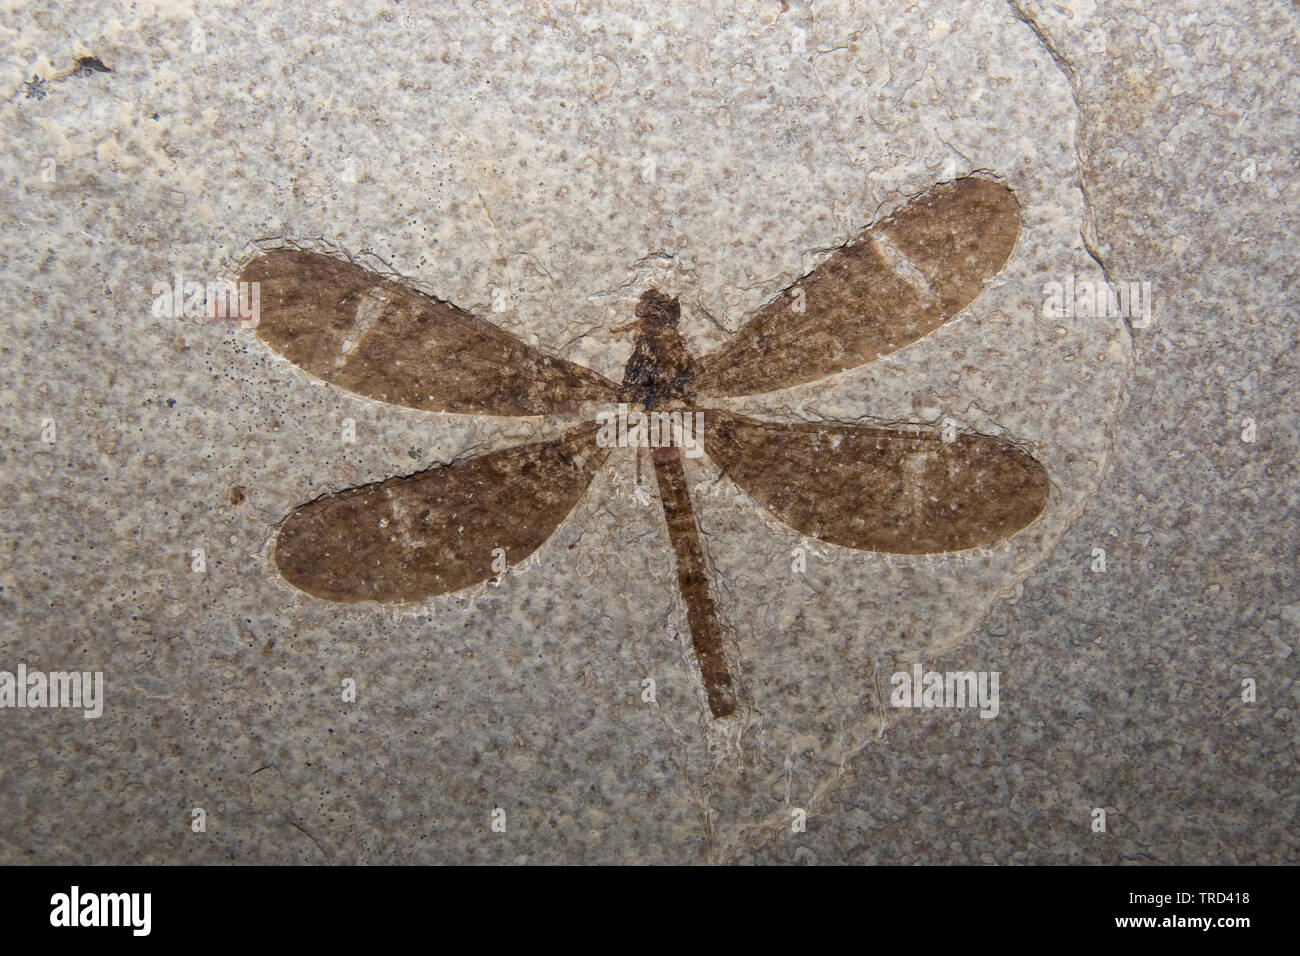 Fossil, Dragonfly, Fossil Butte National Monument, Wyoming Stockfoto